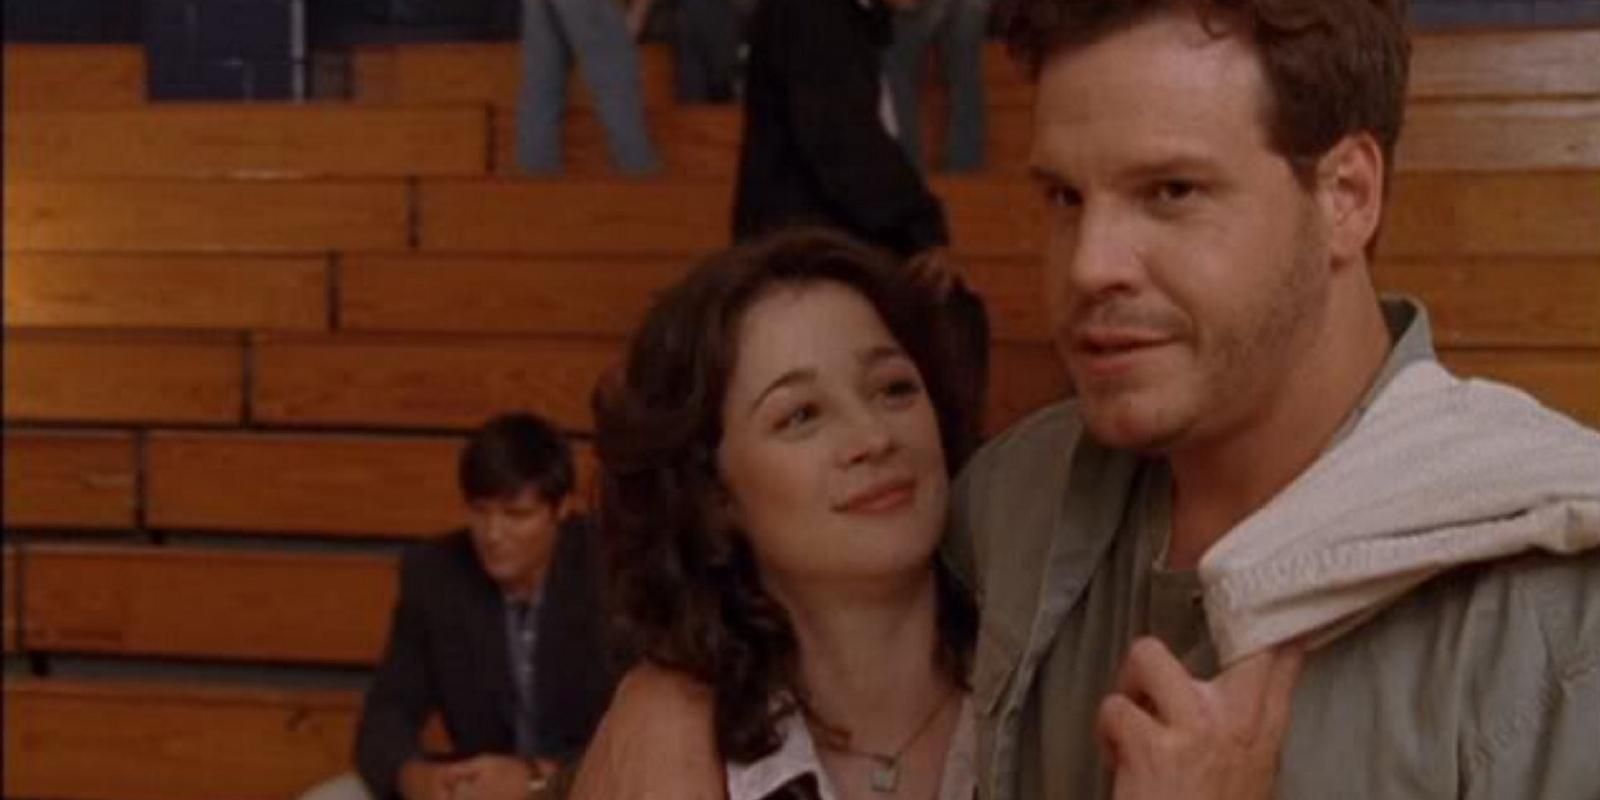 Keith Scott and Karen Roe embrace in the gym of Tree Hill High School in One Tree Hill